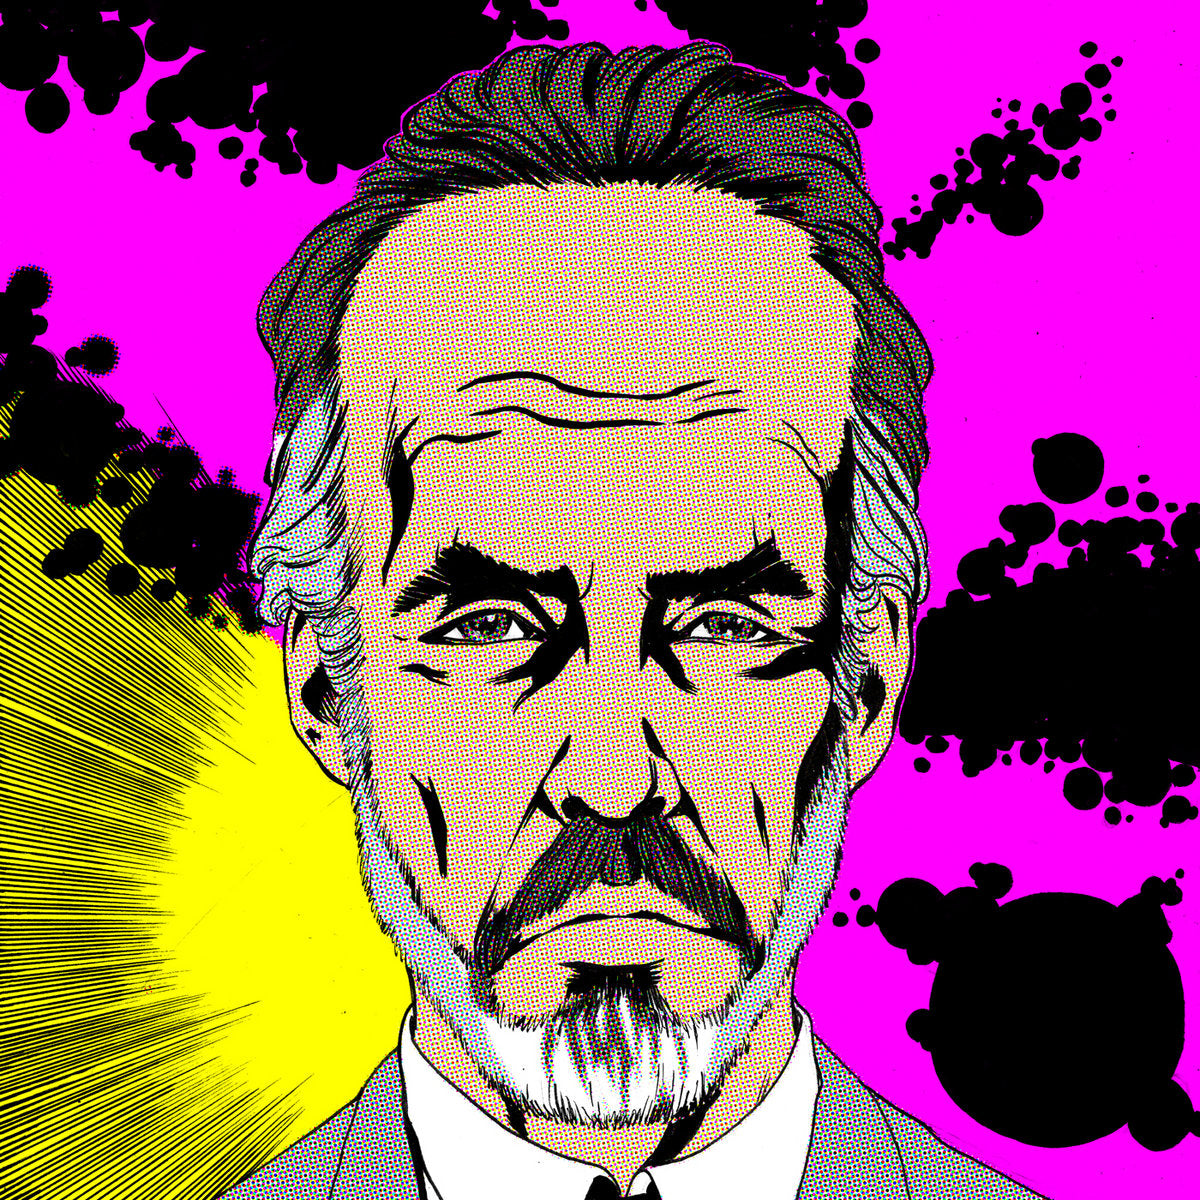 A Part Of The Cosmos (ft. Jordan Peterson)